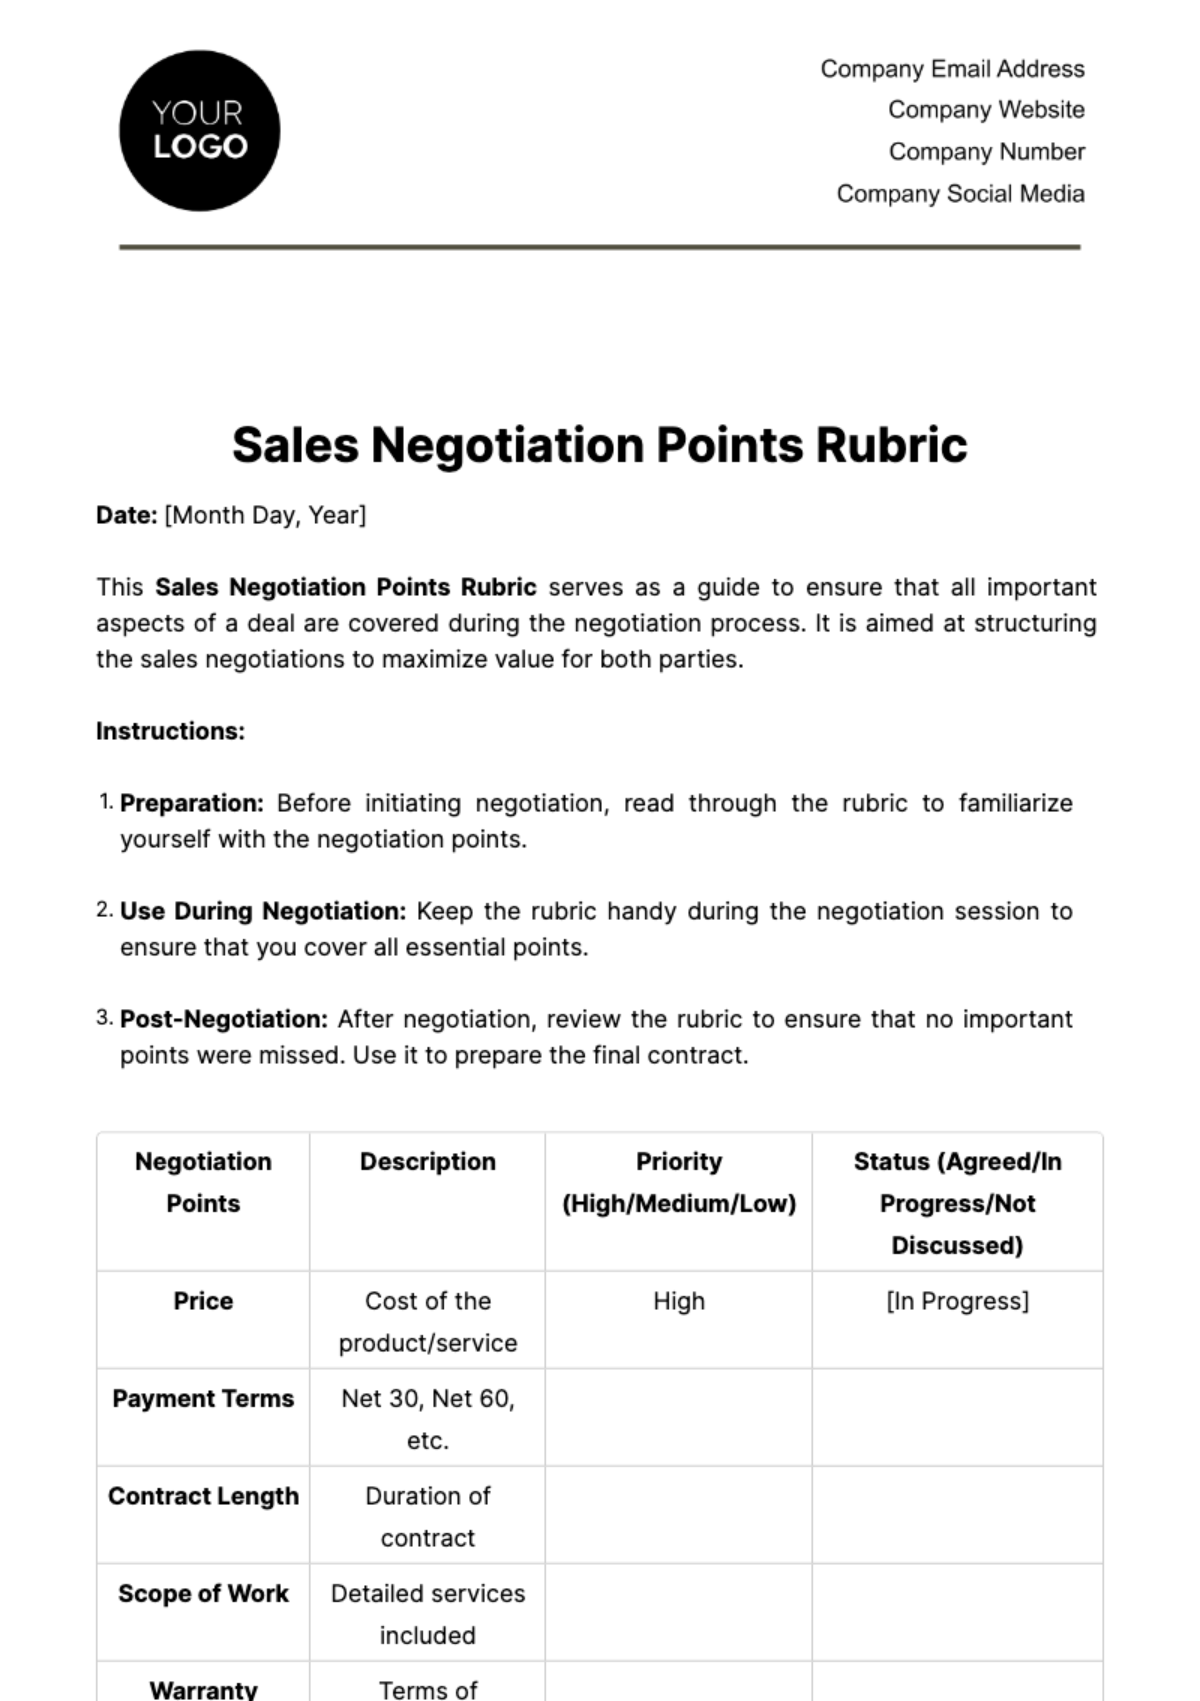 Sales Negotiation Points Rubric Template